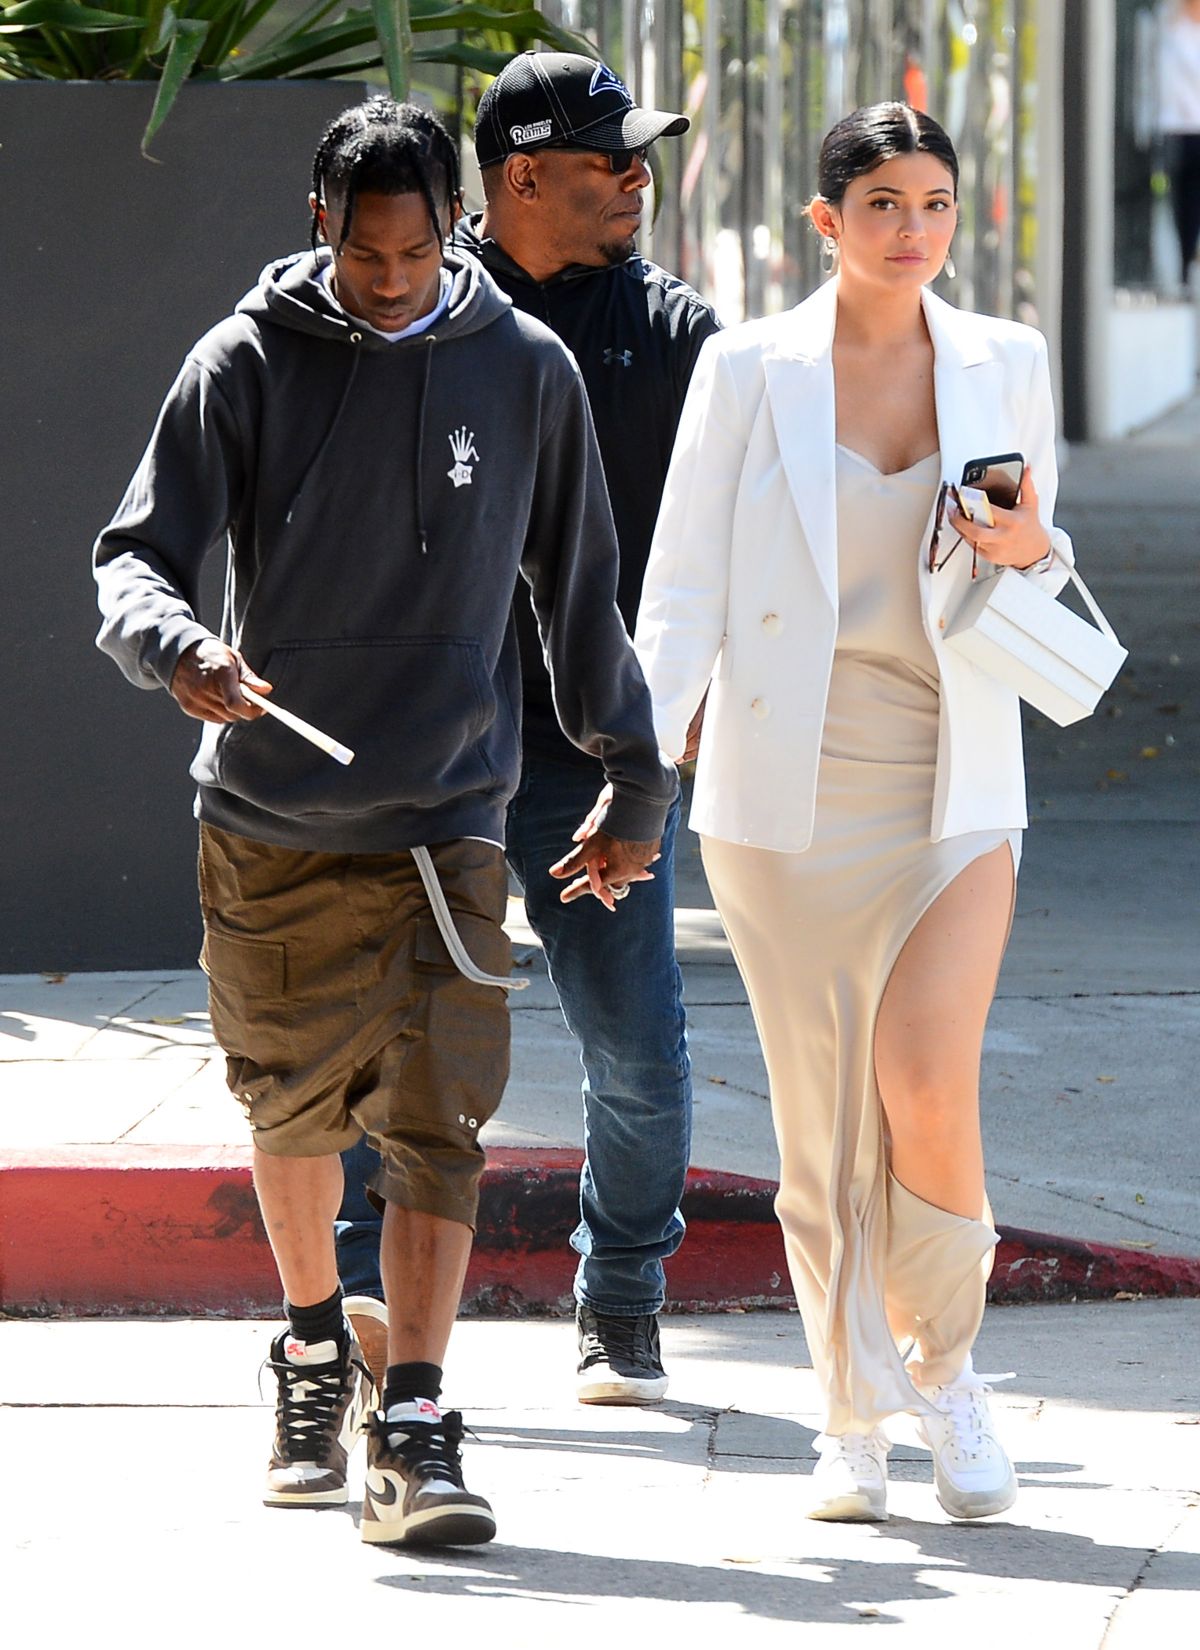 kylie-jenner-and-travis-scott-out-shopping-in-west-hollywood-04-22-2019-2.jpg